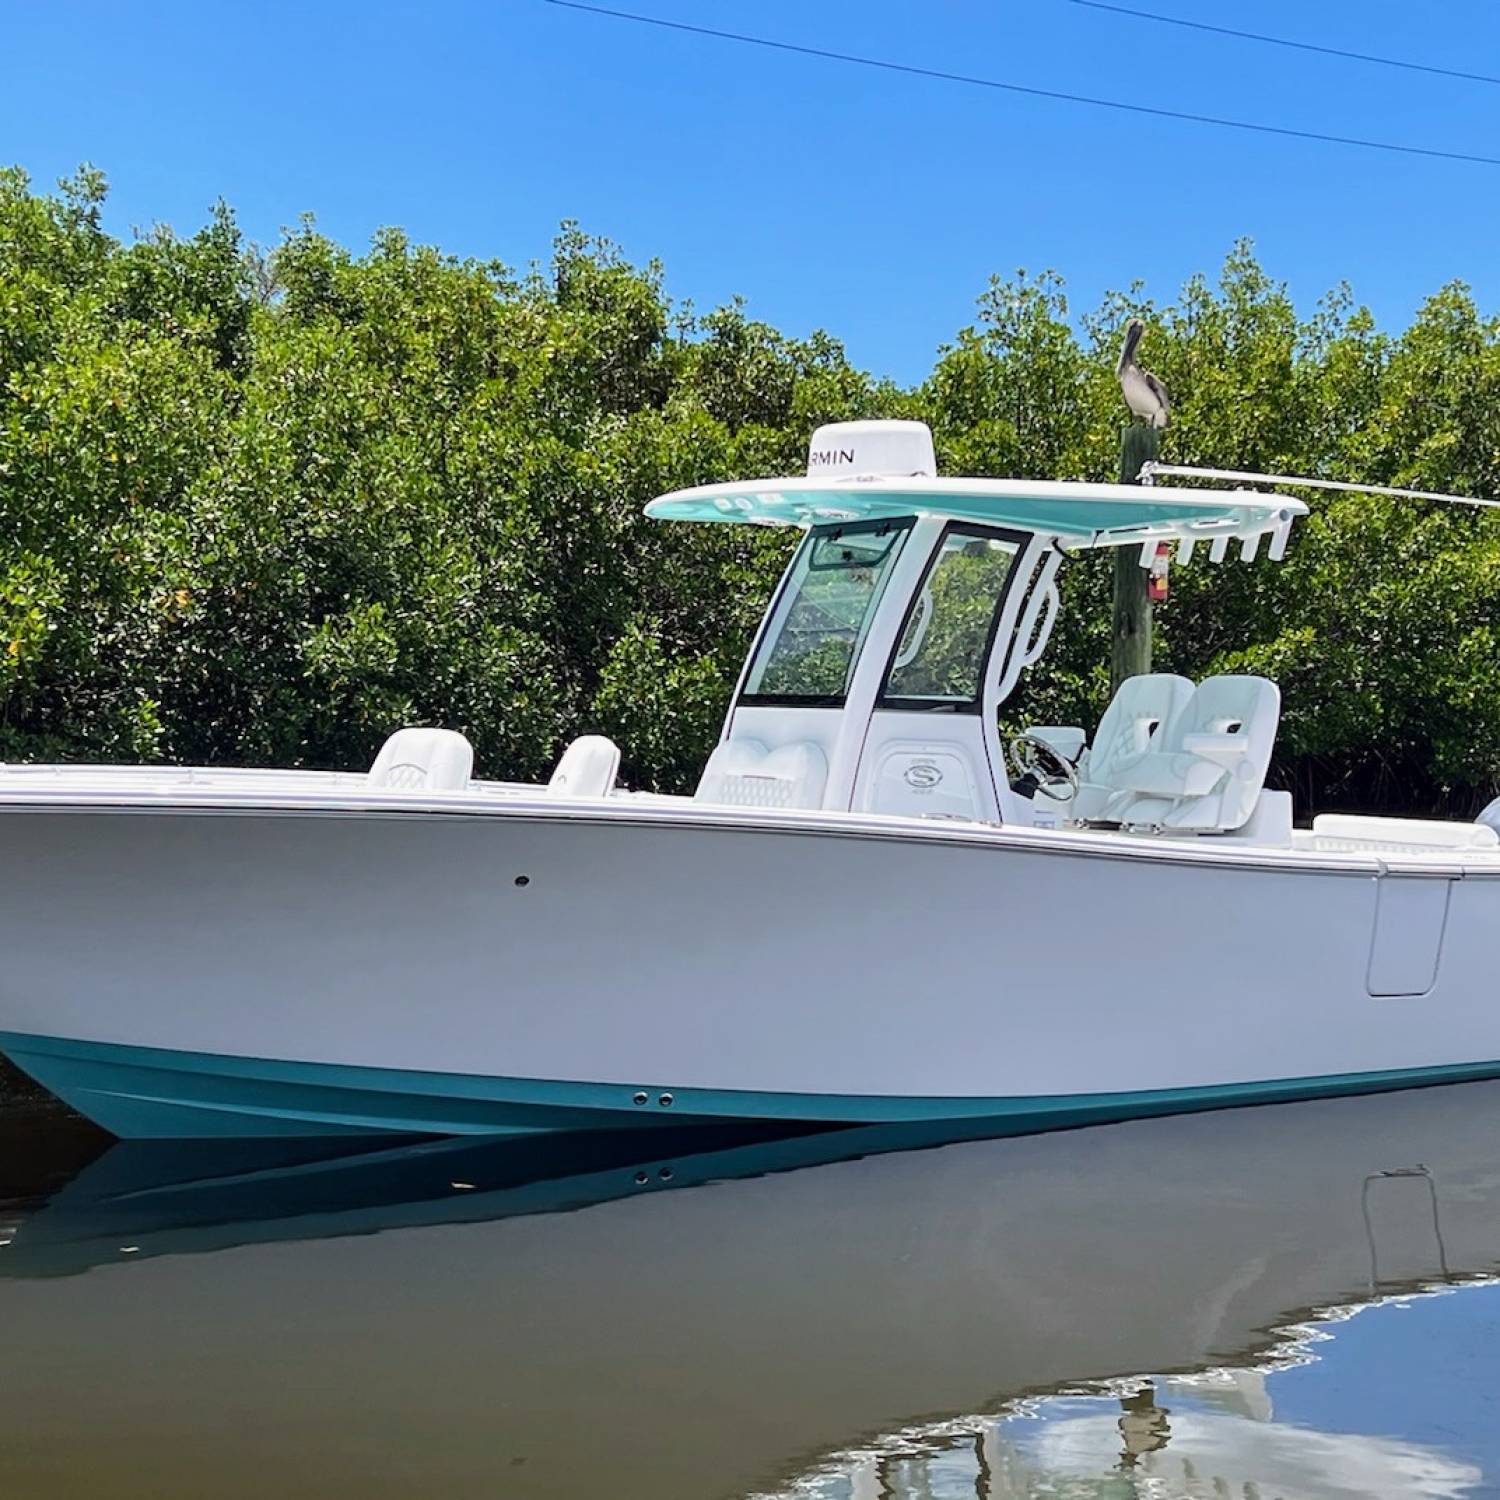 Title: Port Thunder Marine - On board their Sportsman Open 262 Center Console - Location: Thunder Marine St. Pete, Florida. Participating in the Photo Contest #SportsmanAugust